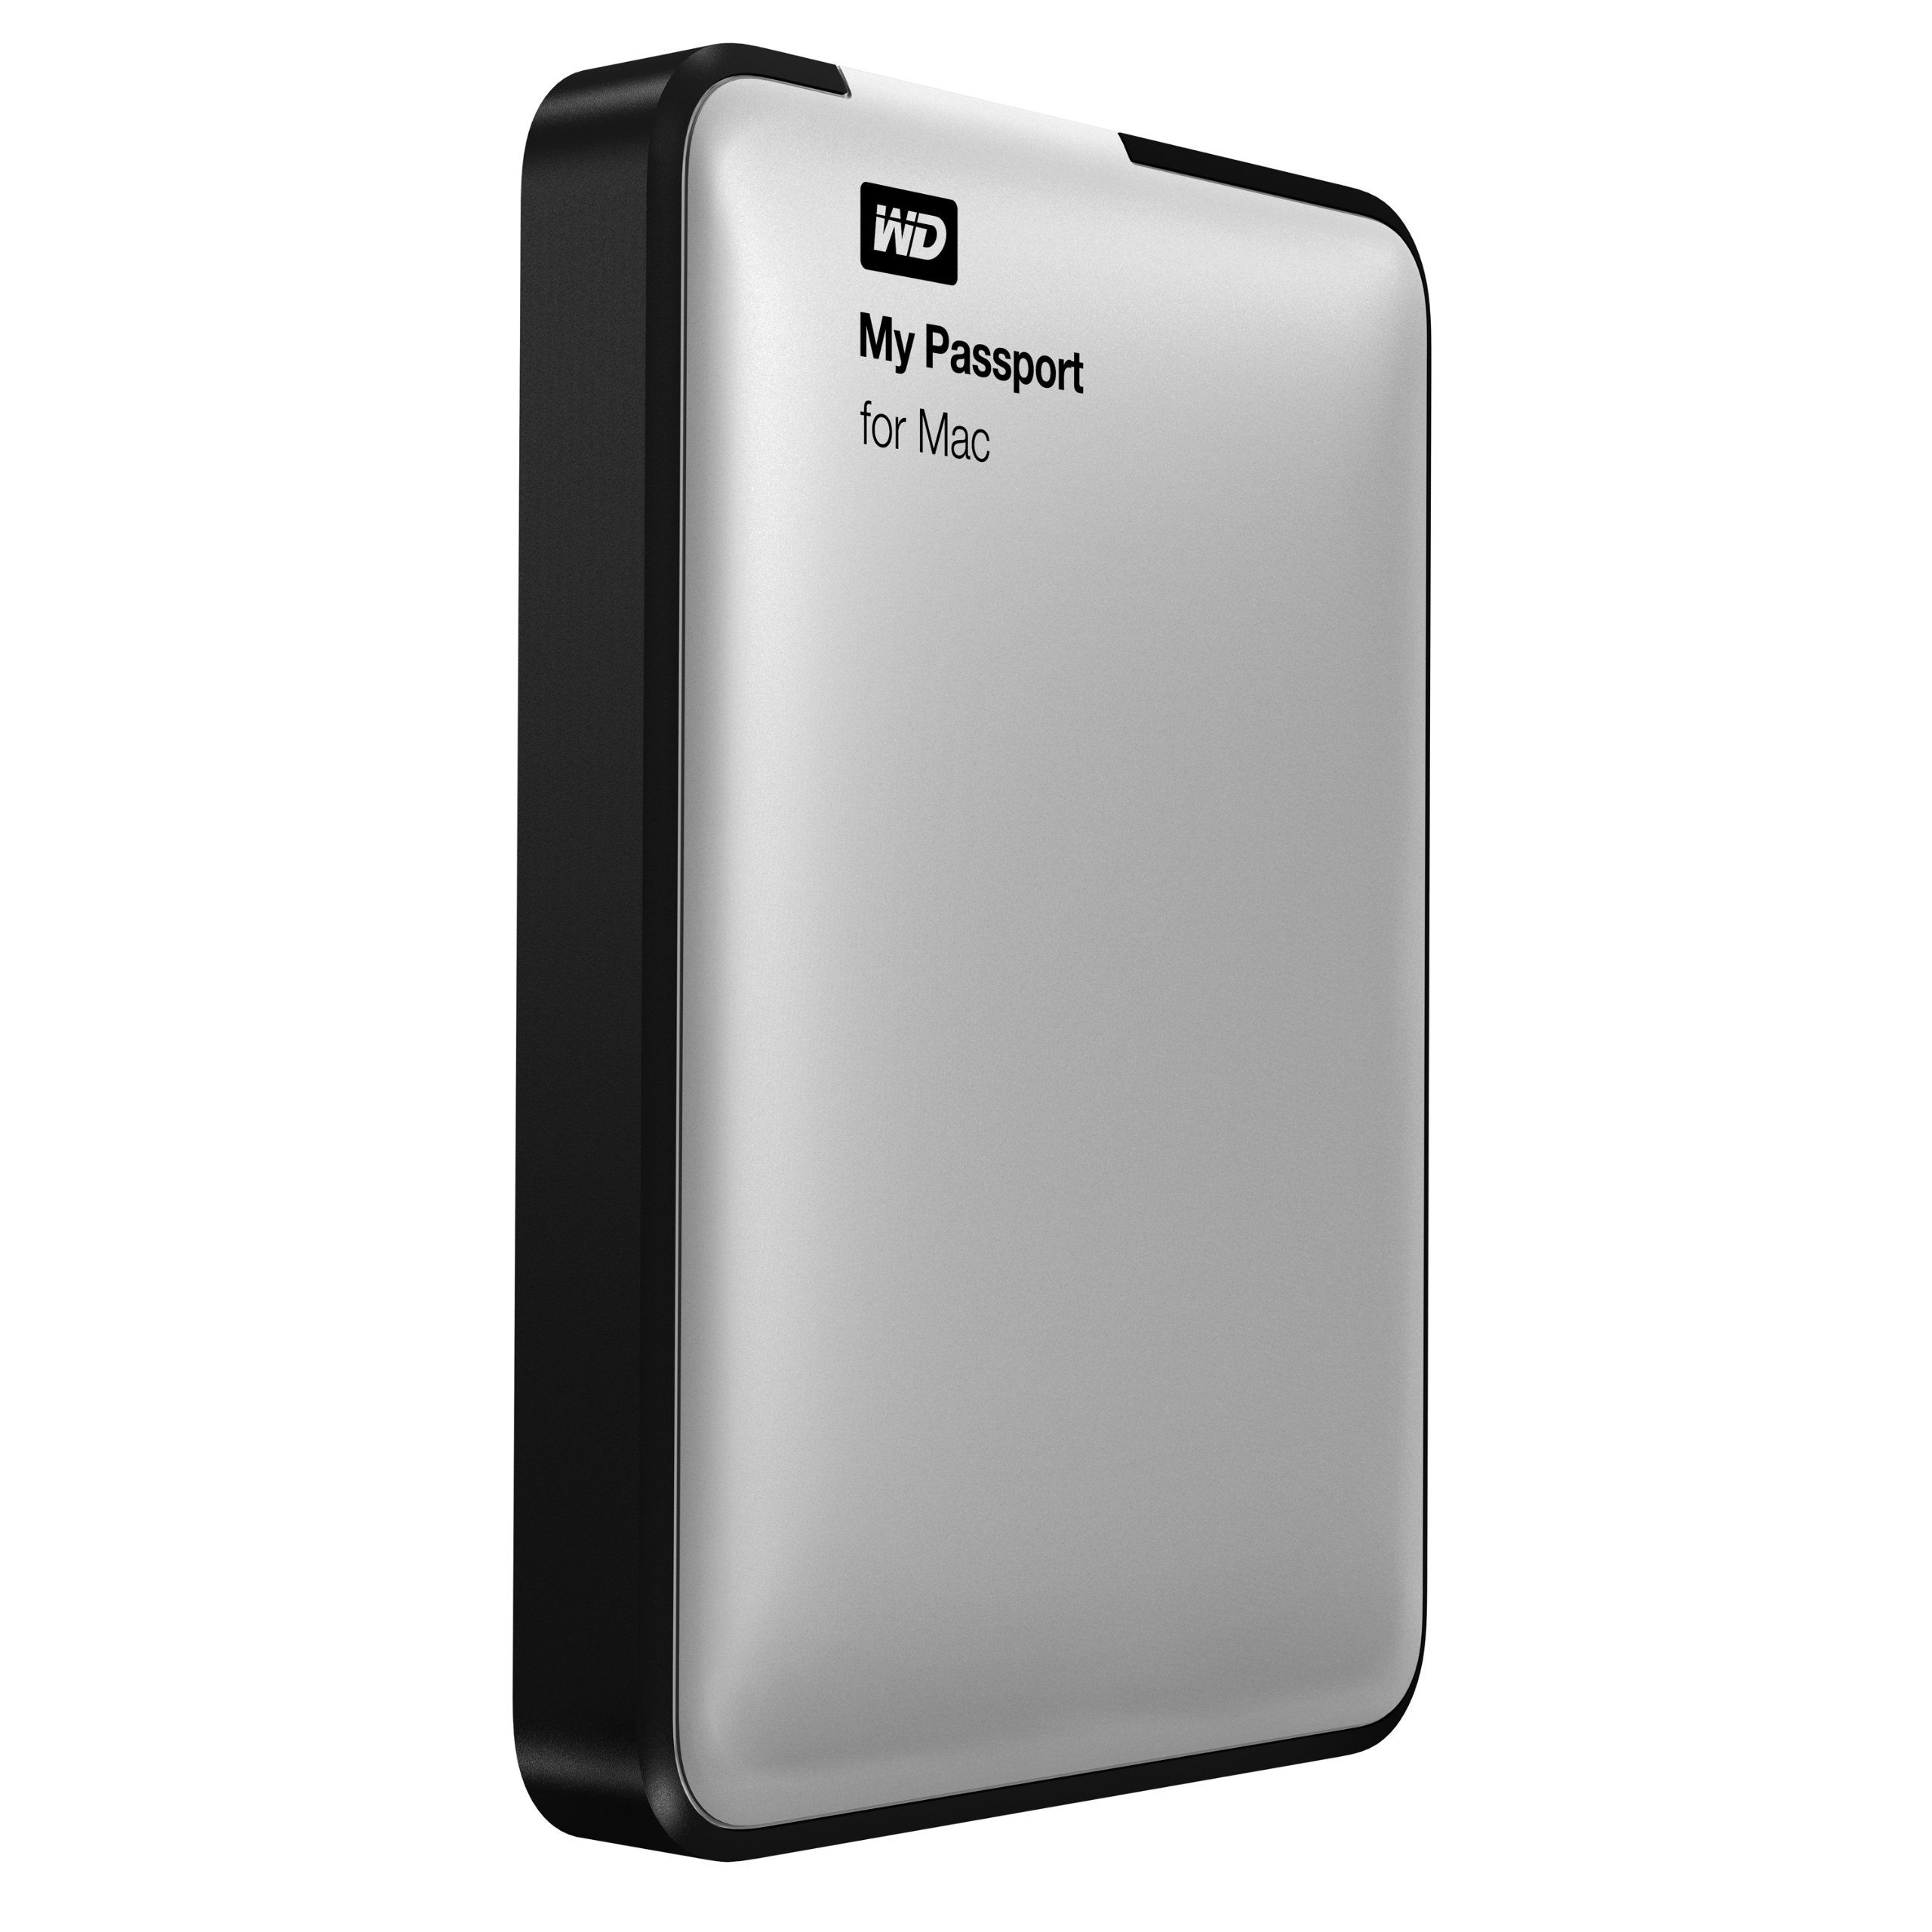 wd - my passport for mac 4tb external usb 3.0 portable hard drive - black and time machine